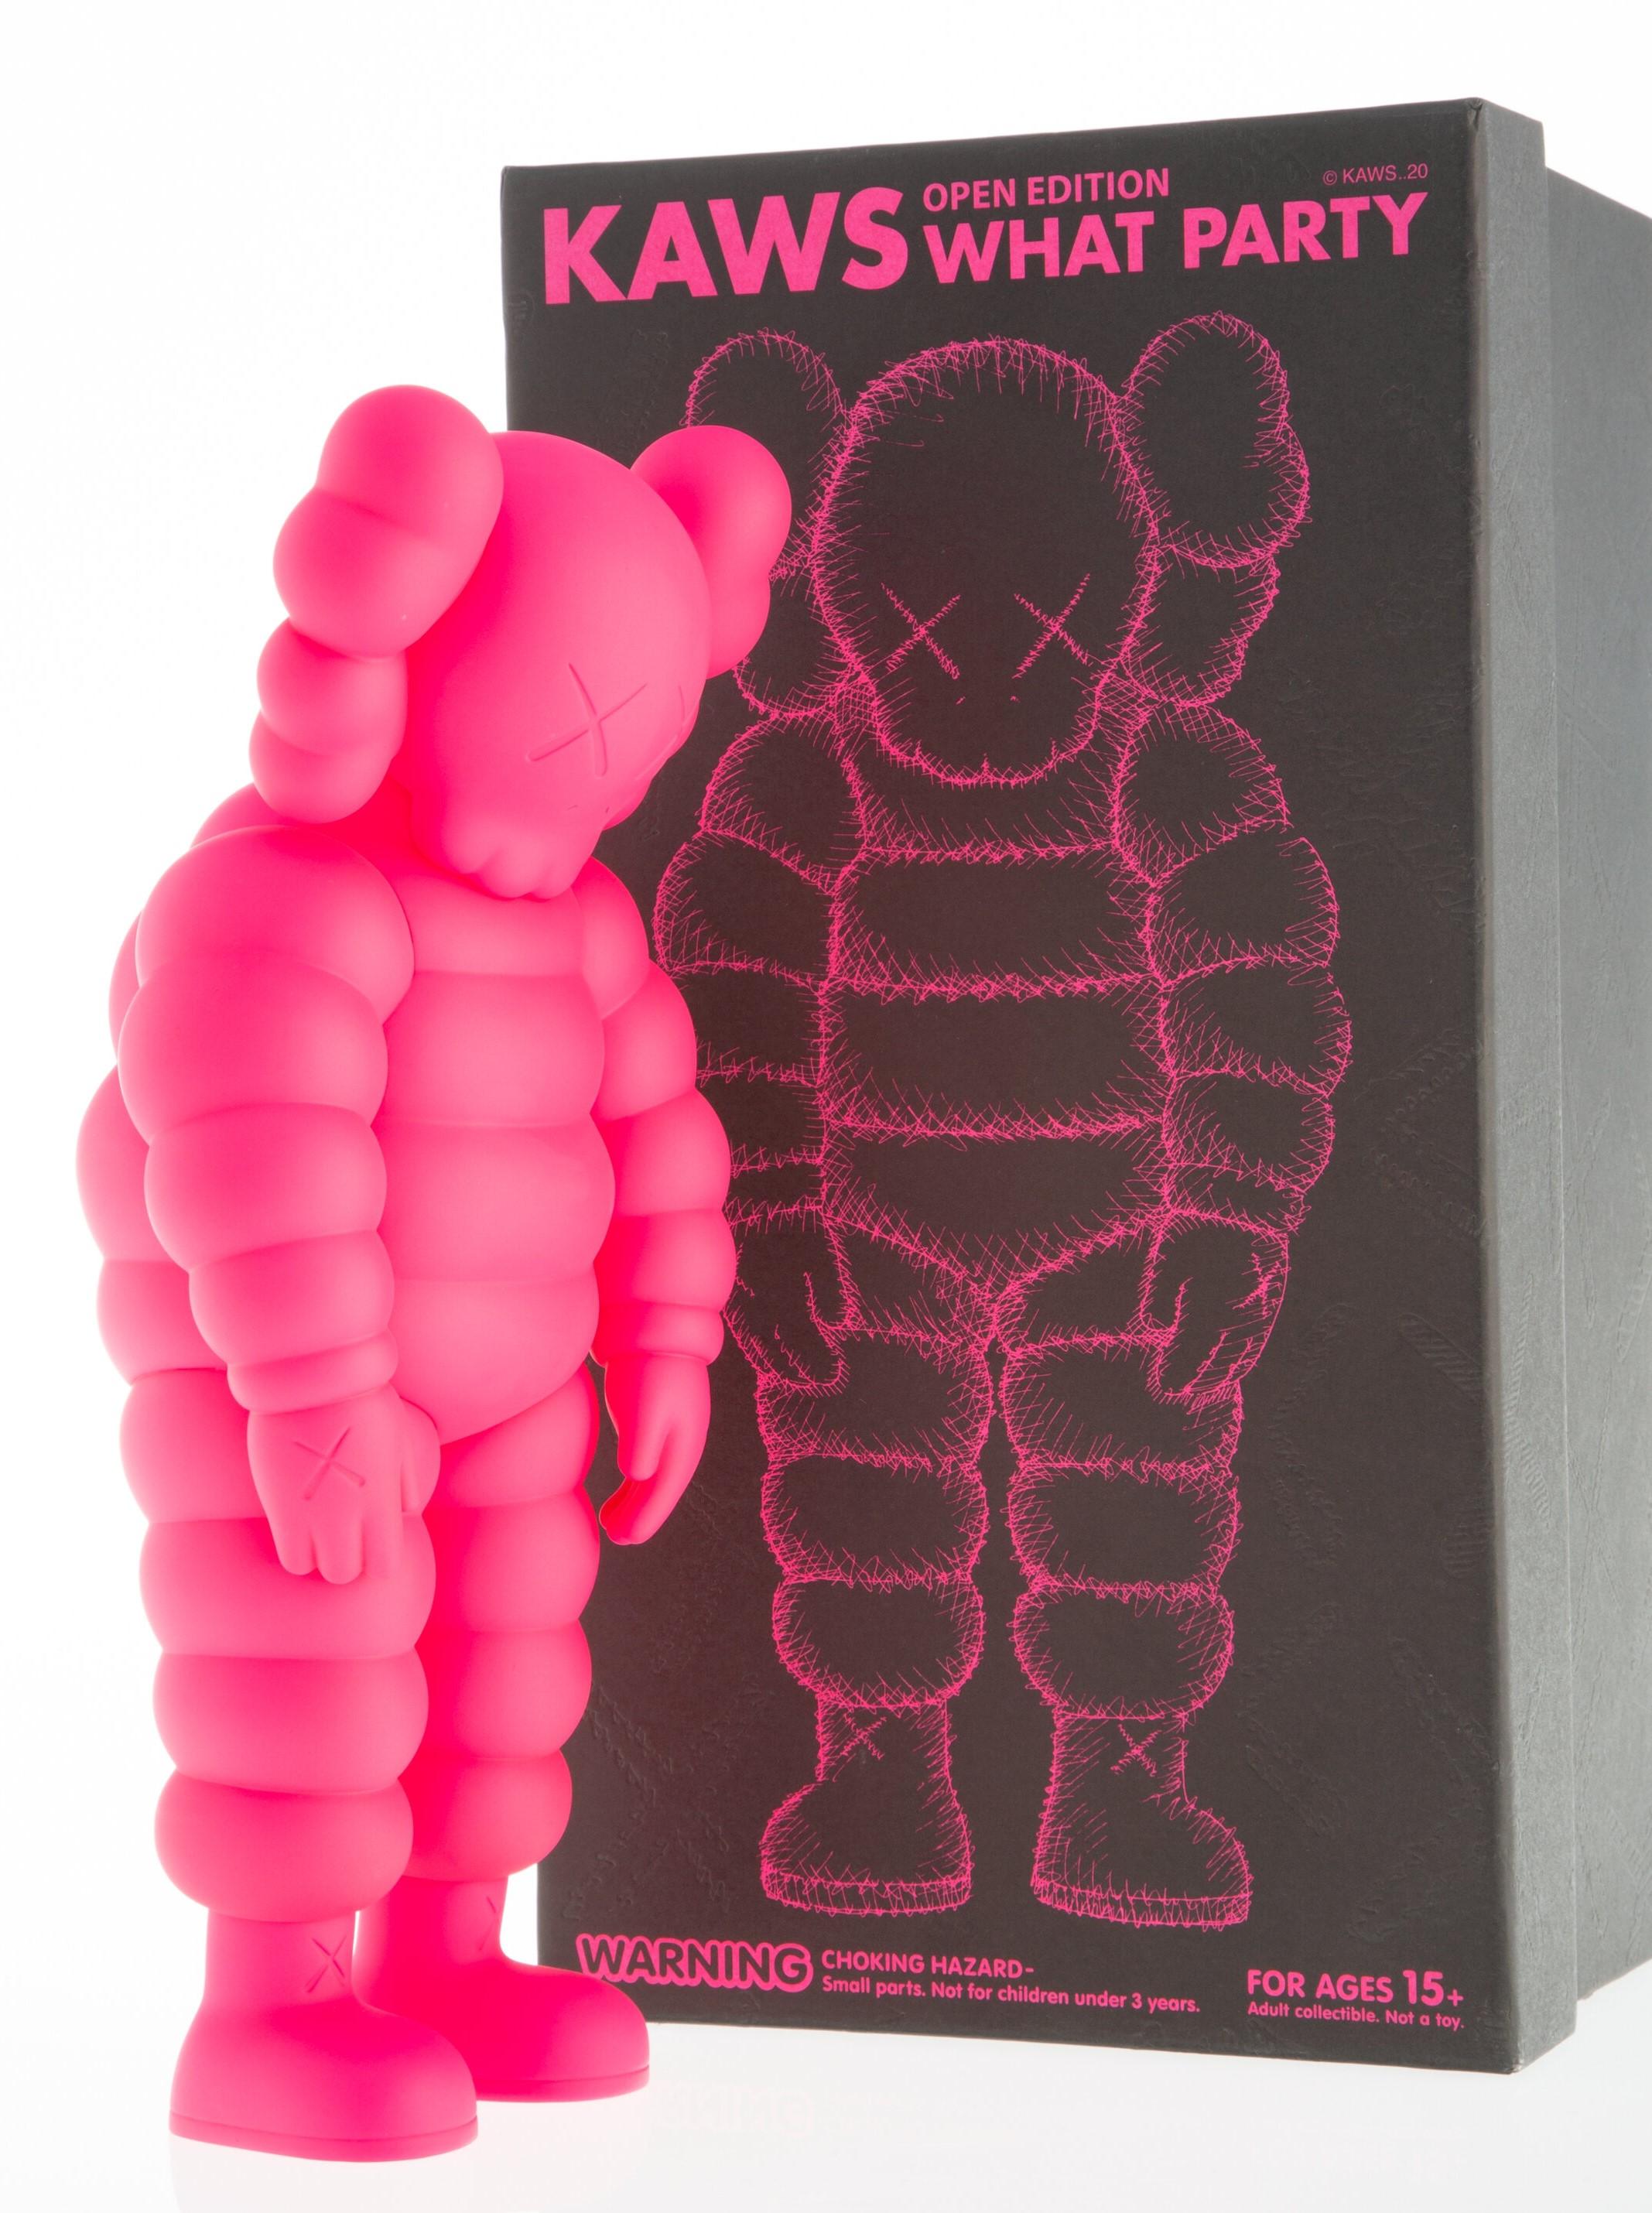 KAWS "What Party" Brooklyn Museum Pink LIMITED EDITION Sculpture Street Art